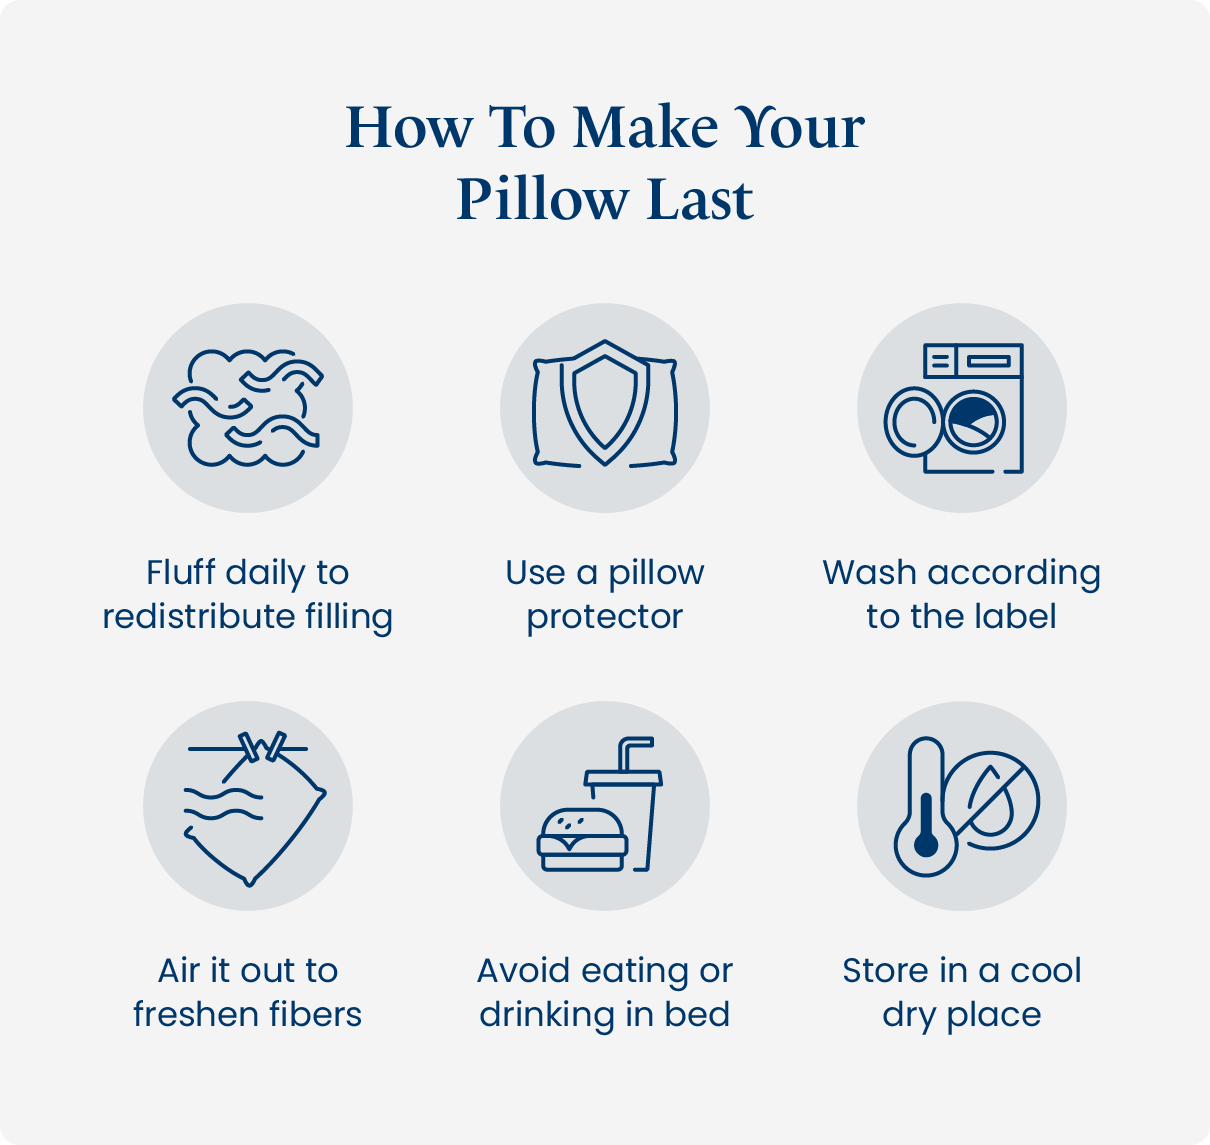 6 ways to extend the life of your pillow.